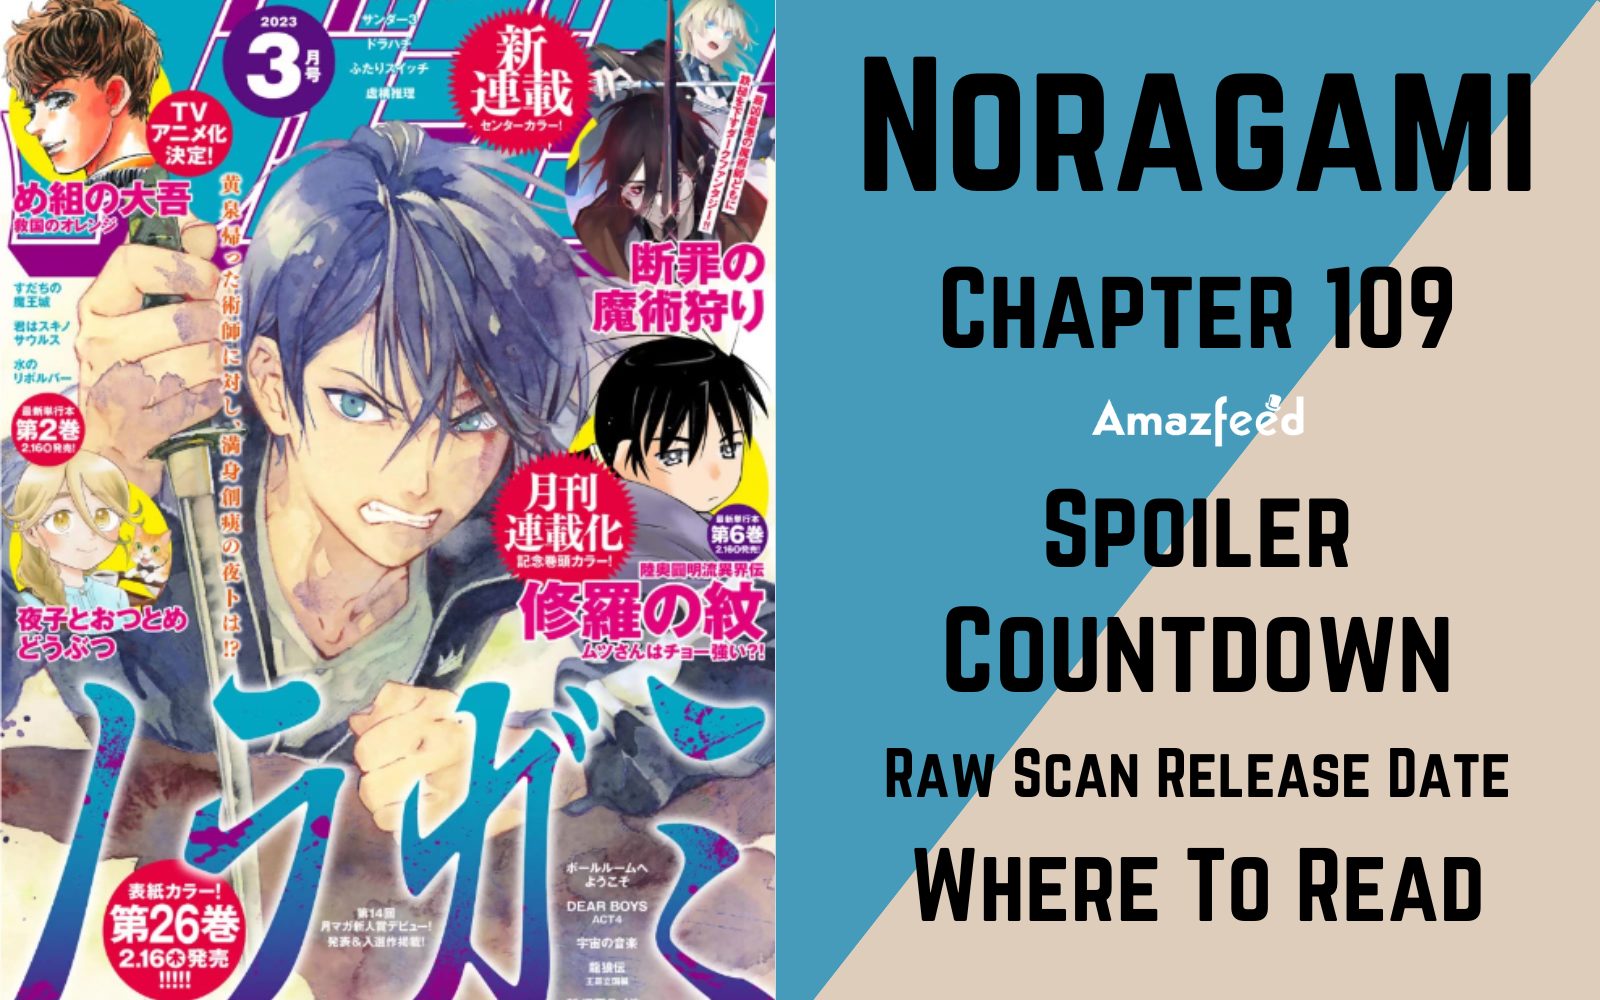 Noragami Season 3: Release Date, Renewed or Cancelled? » Whenwill